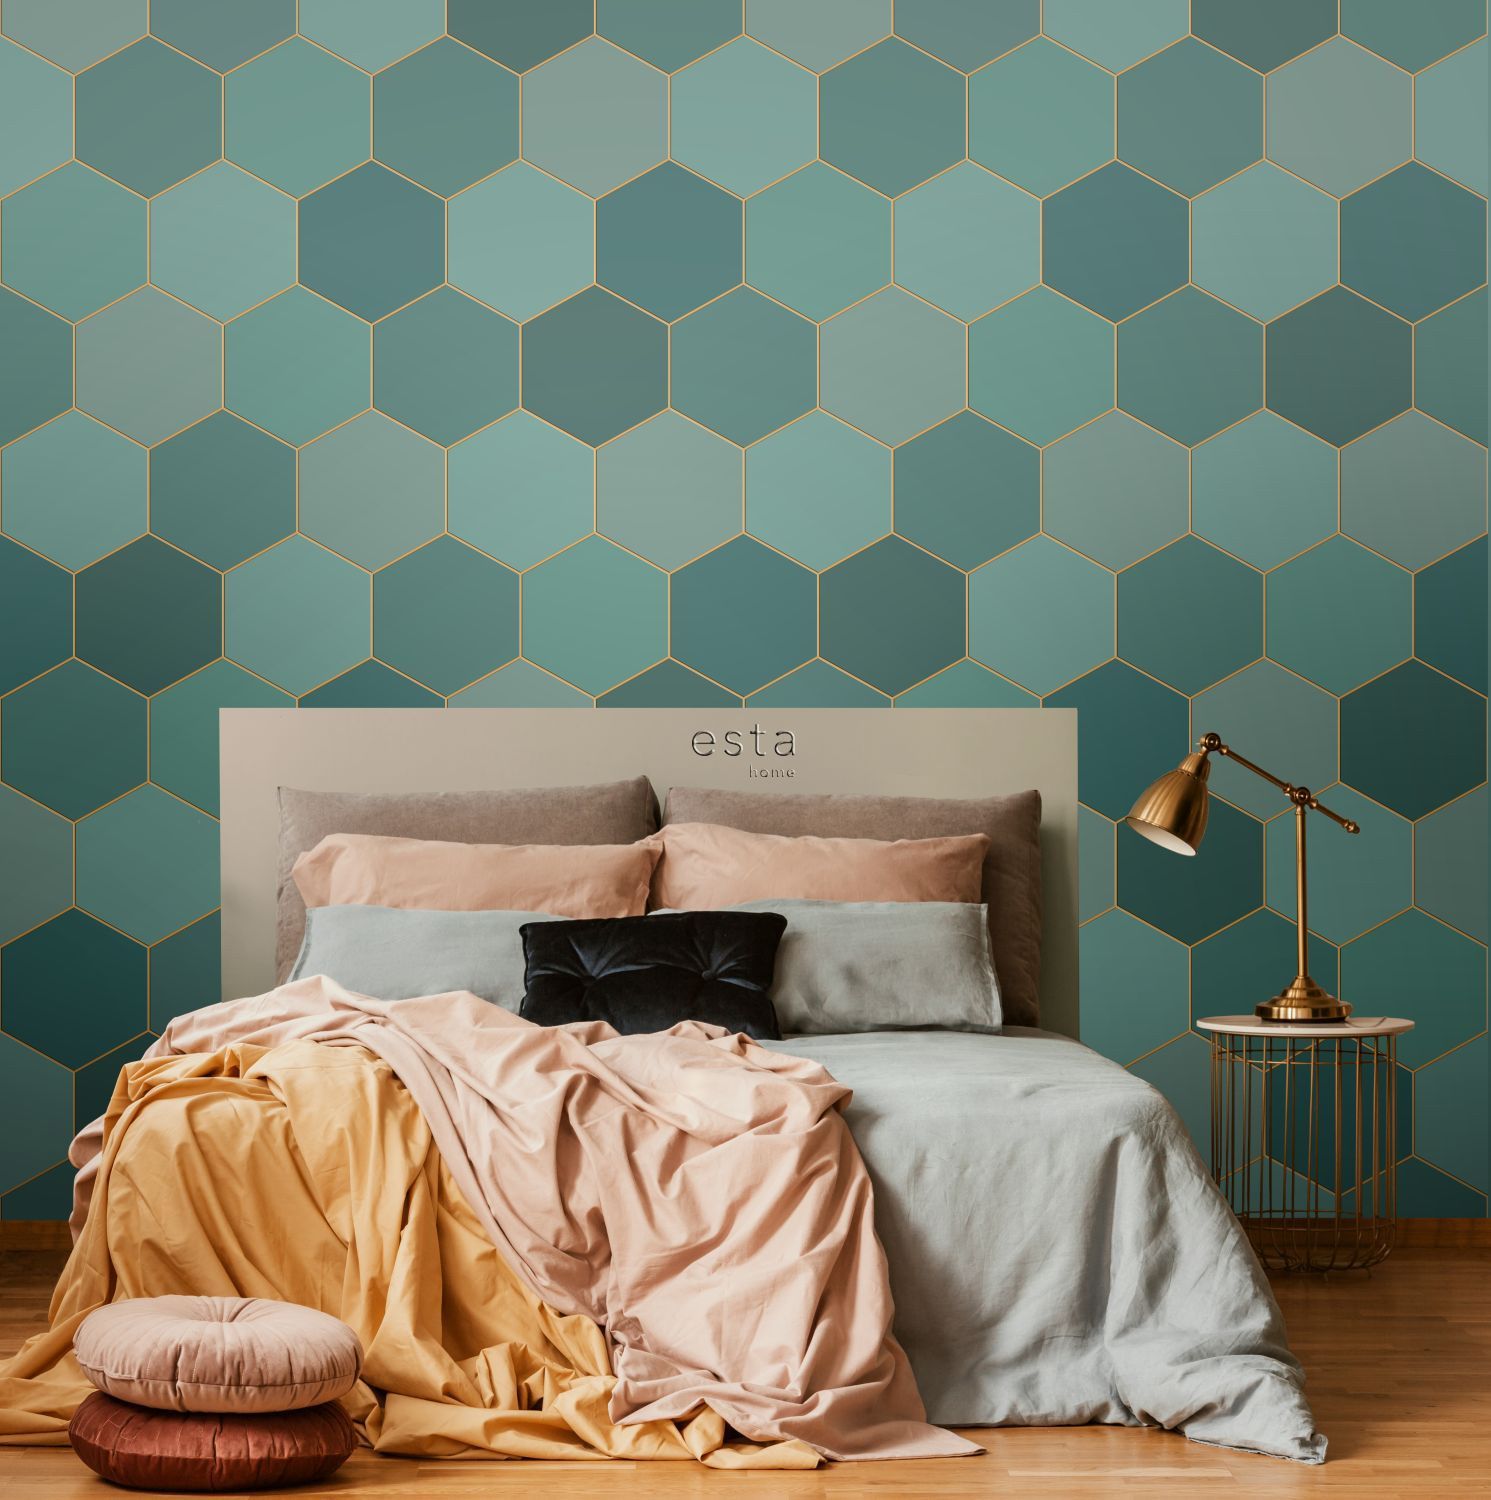 Wall Mural Hexagon Sea Green And Teal – Be Inspired Throughout Teal Hexagons Wall Art (View 12 of 15)